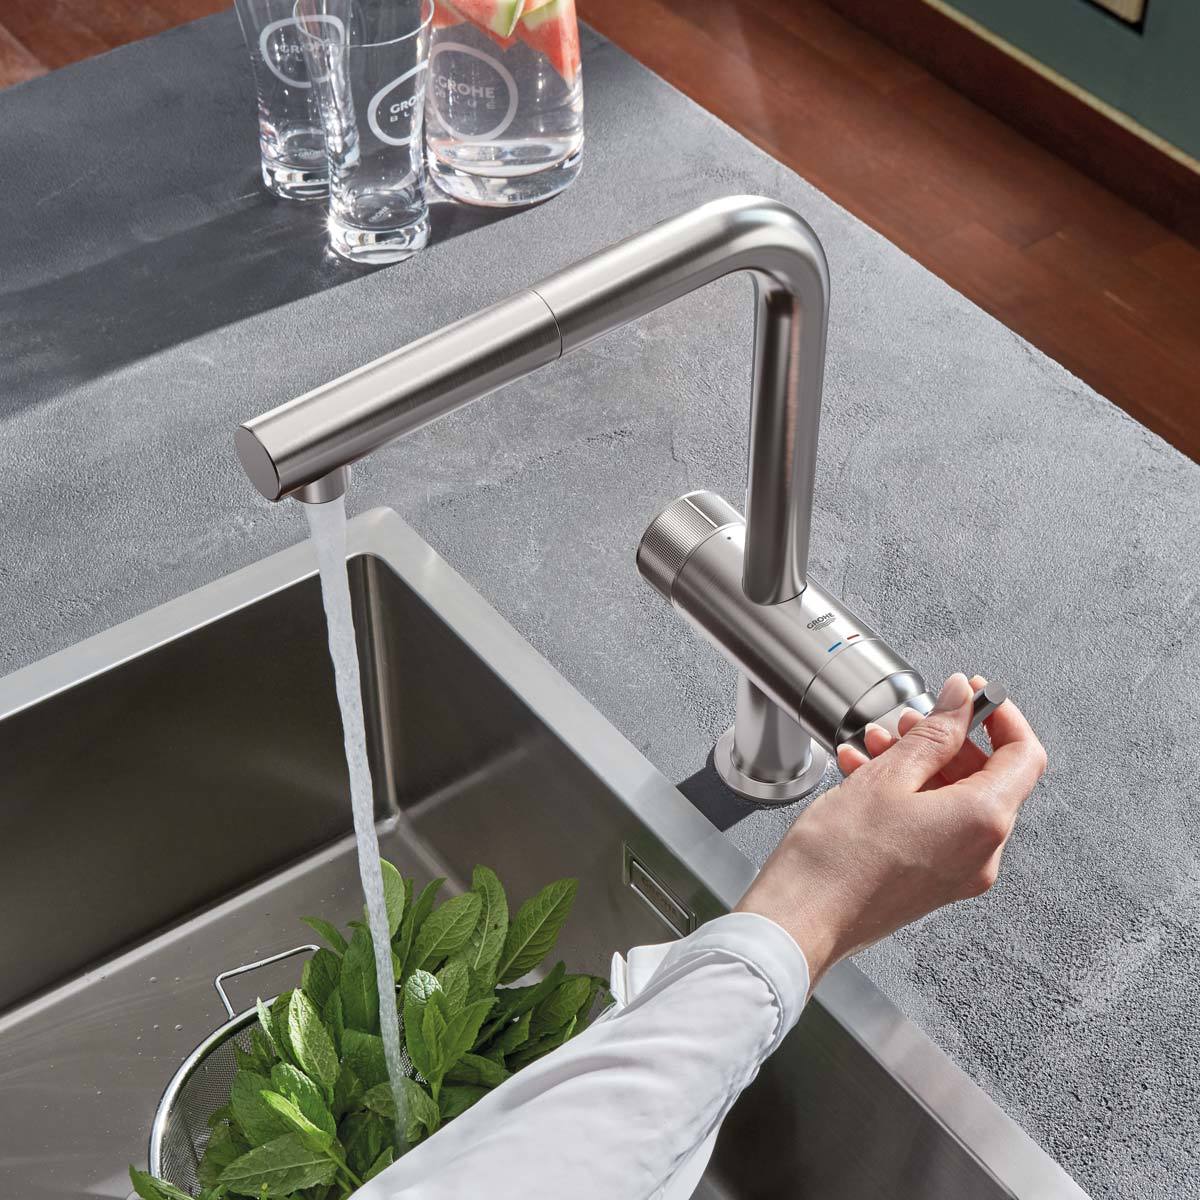 Lifestyle image of tap in use washing food in sink